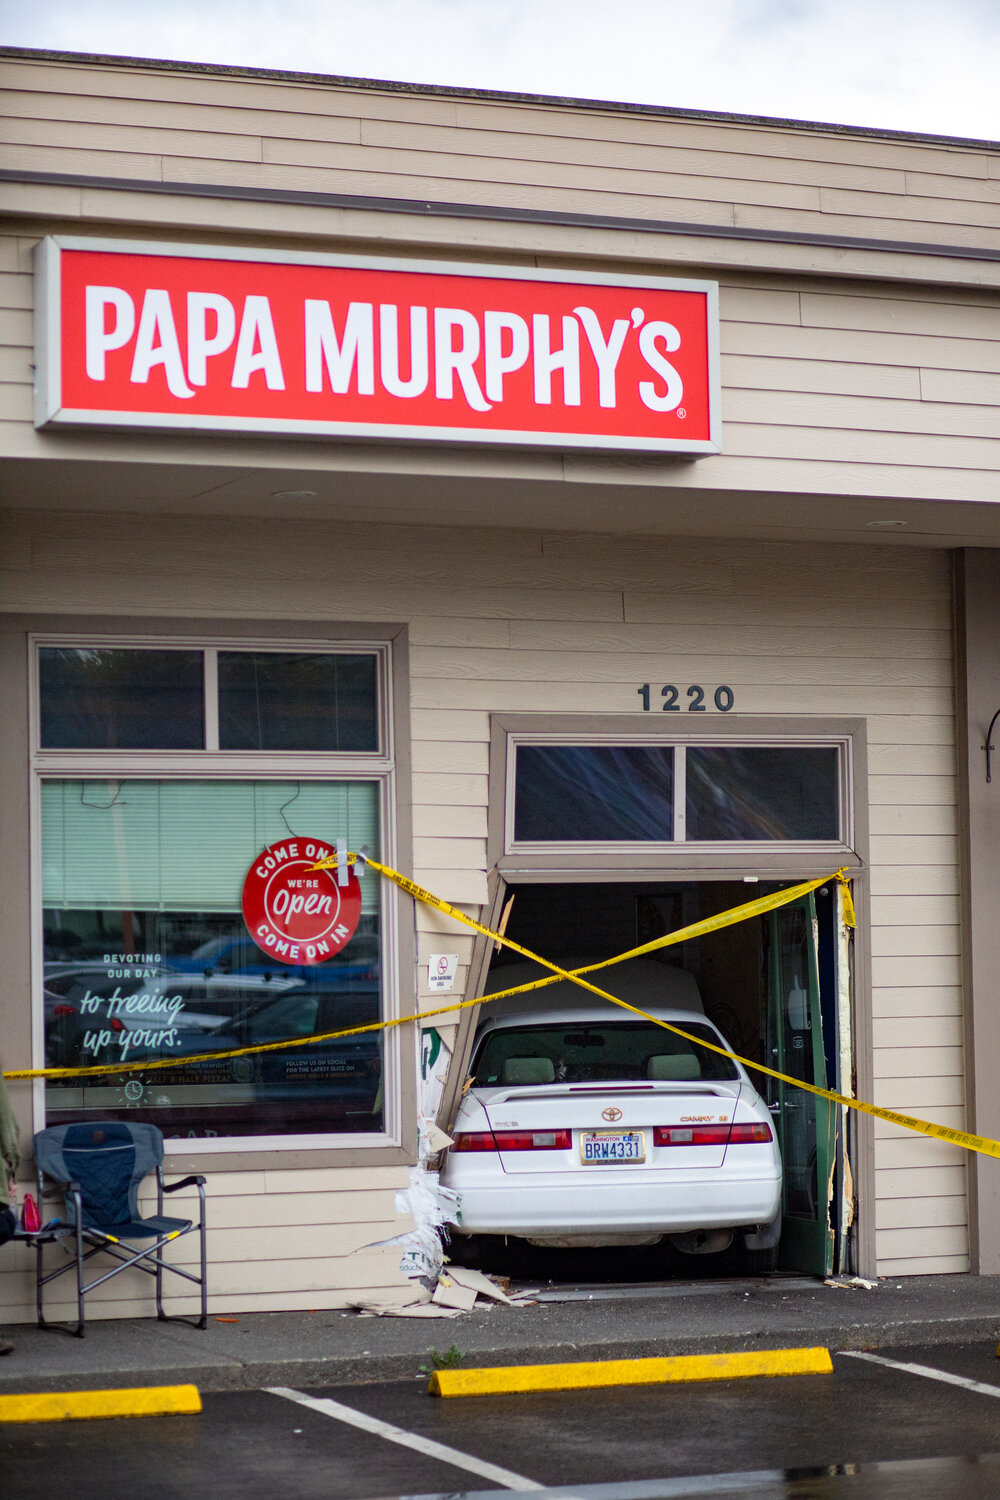 Around noon on Tuesday, Aug. 29, a woman lost control of her vehicle and drove through the Papa Murphy’s door and into the lobby.